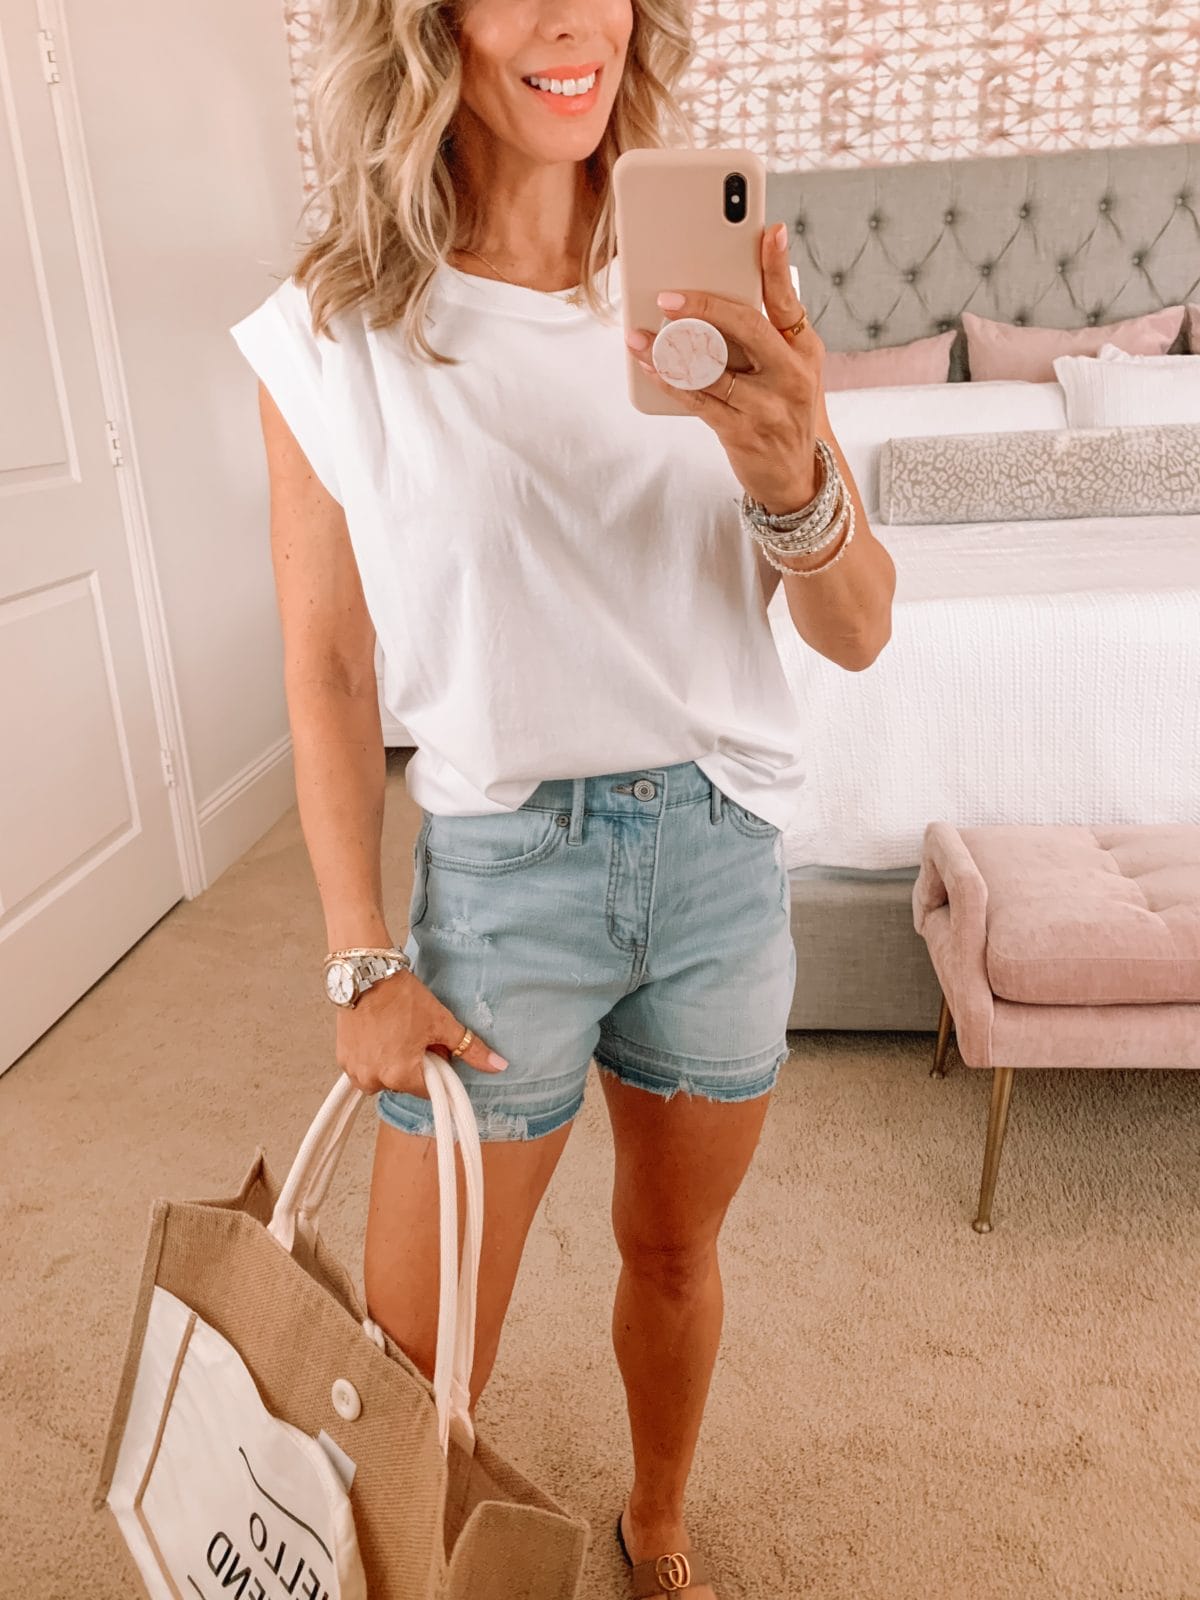 Dressing Room Finds, LOFT, White Muscle Tank, Denim Shorts, Sandals and weekend tote